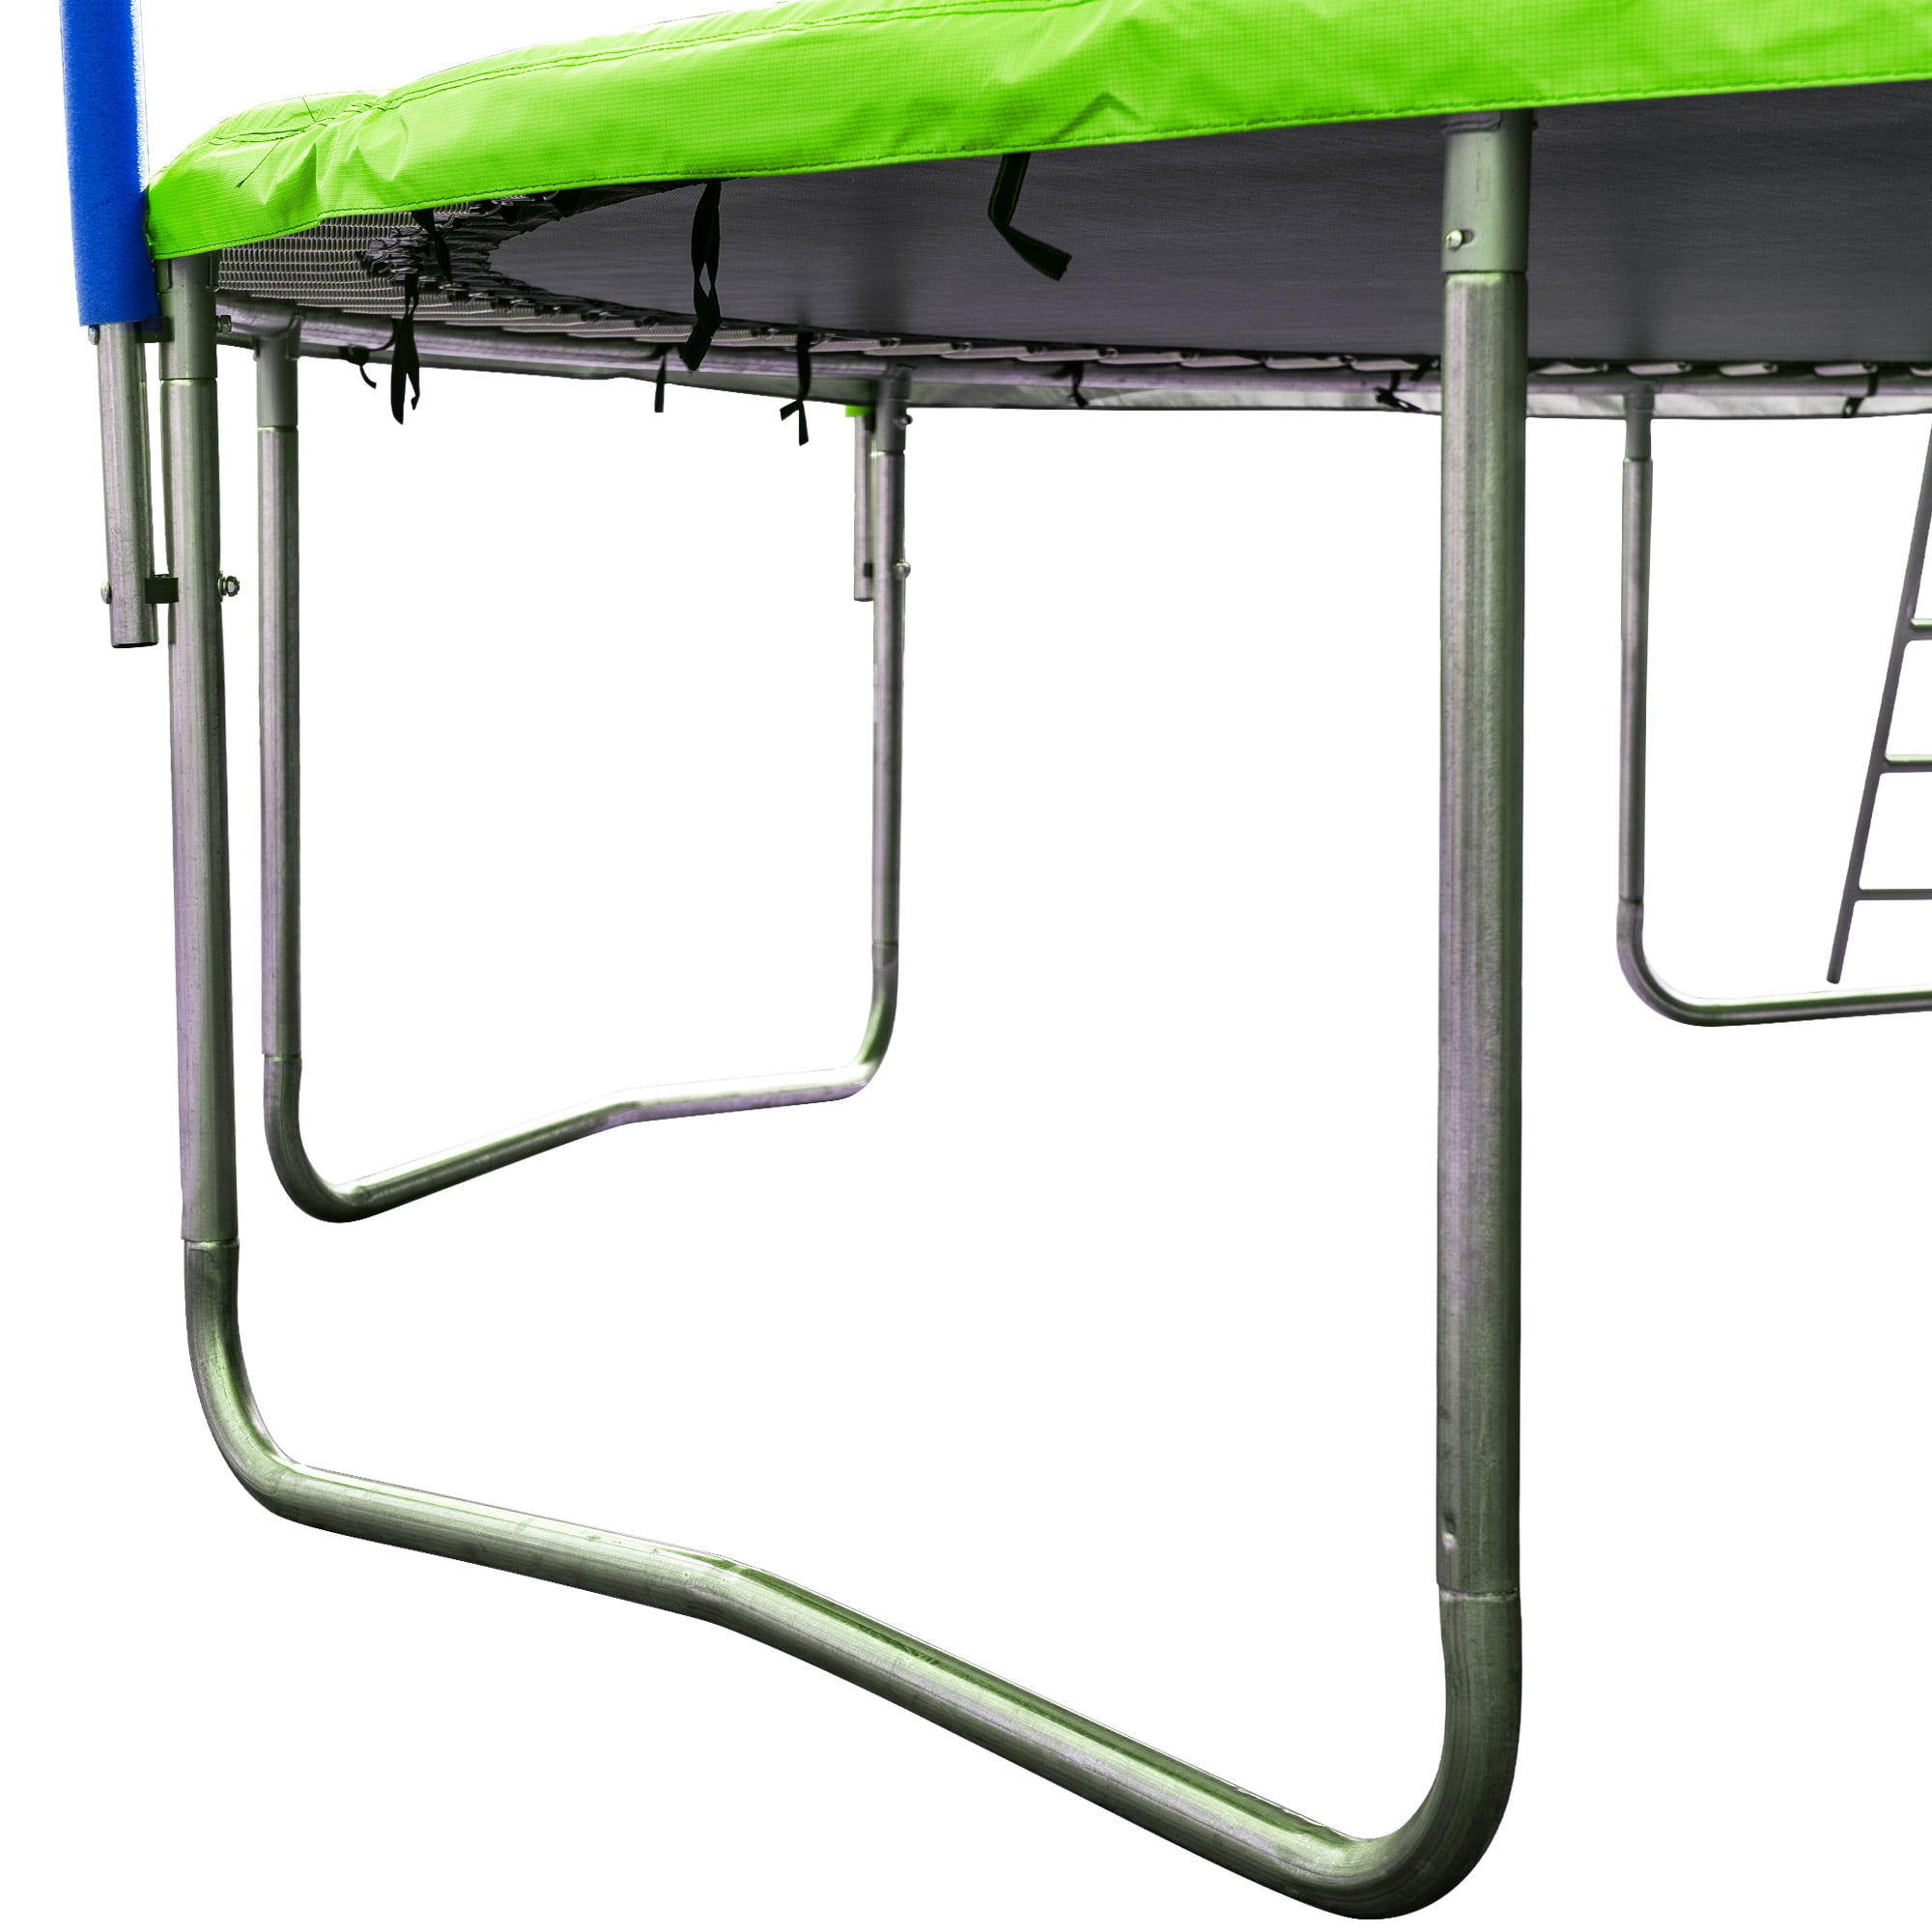 Skyhigh 8ft Deluxe Trampoline Weather Cover Elasticated easy fit built to last 